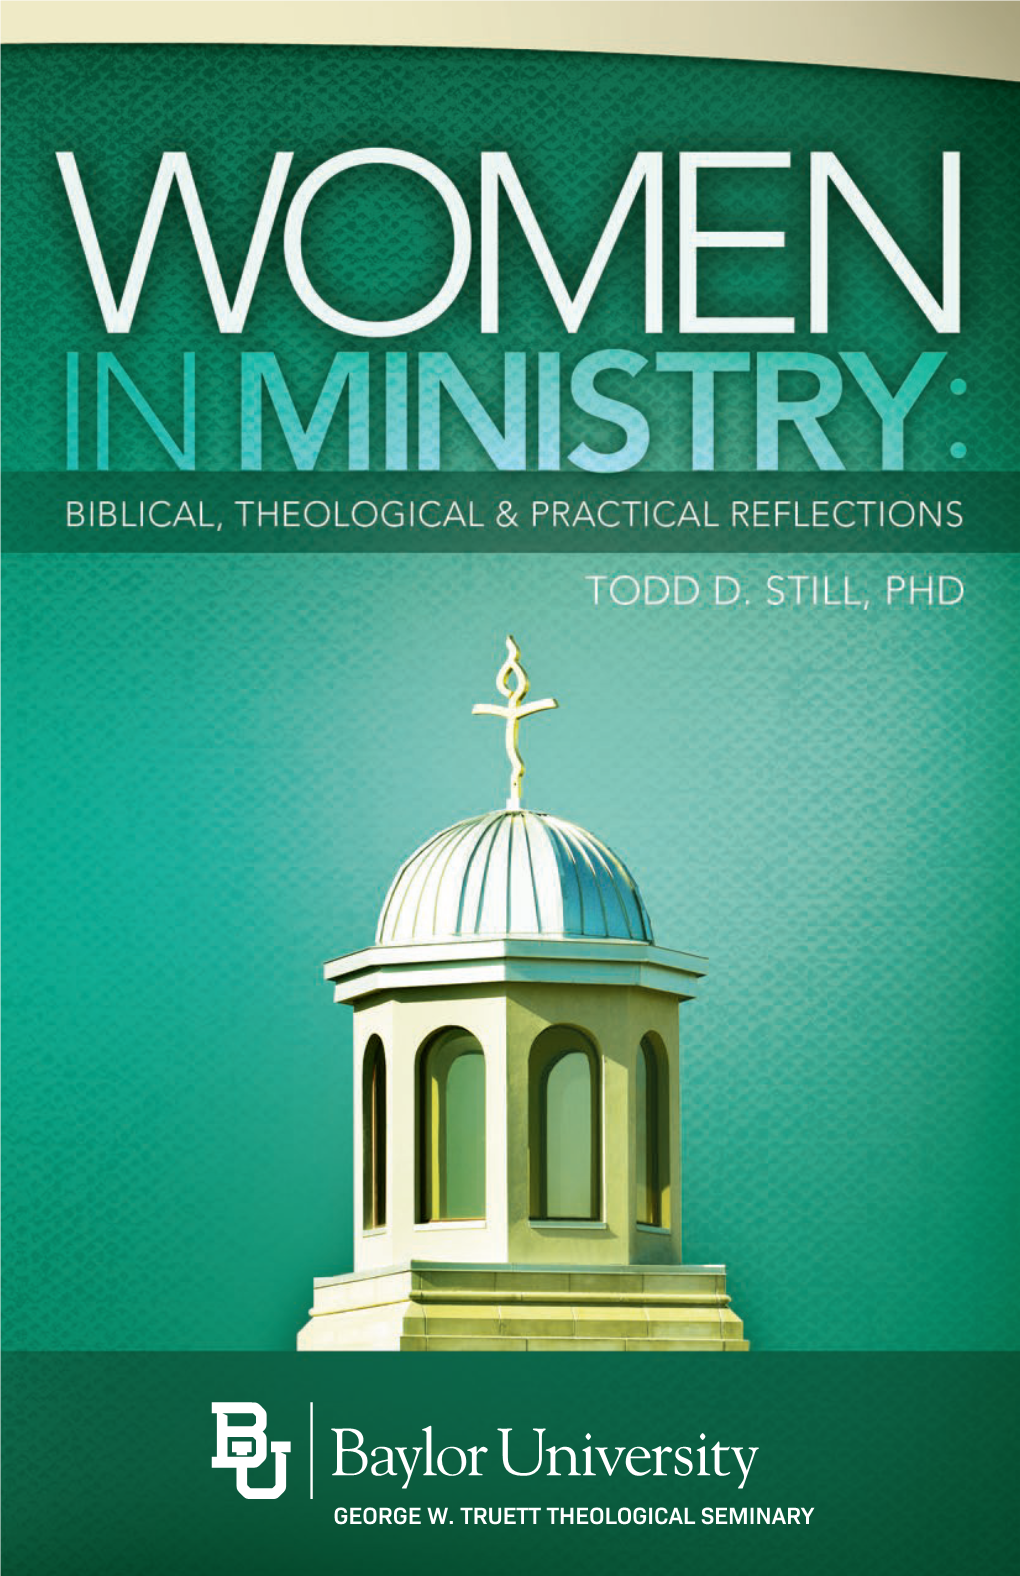 Women in Ministry Are Not Explicitly Or Systematically